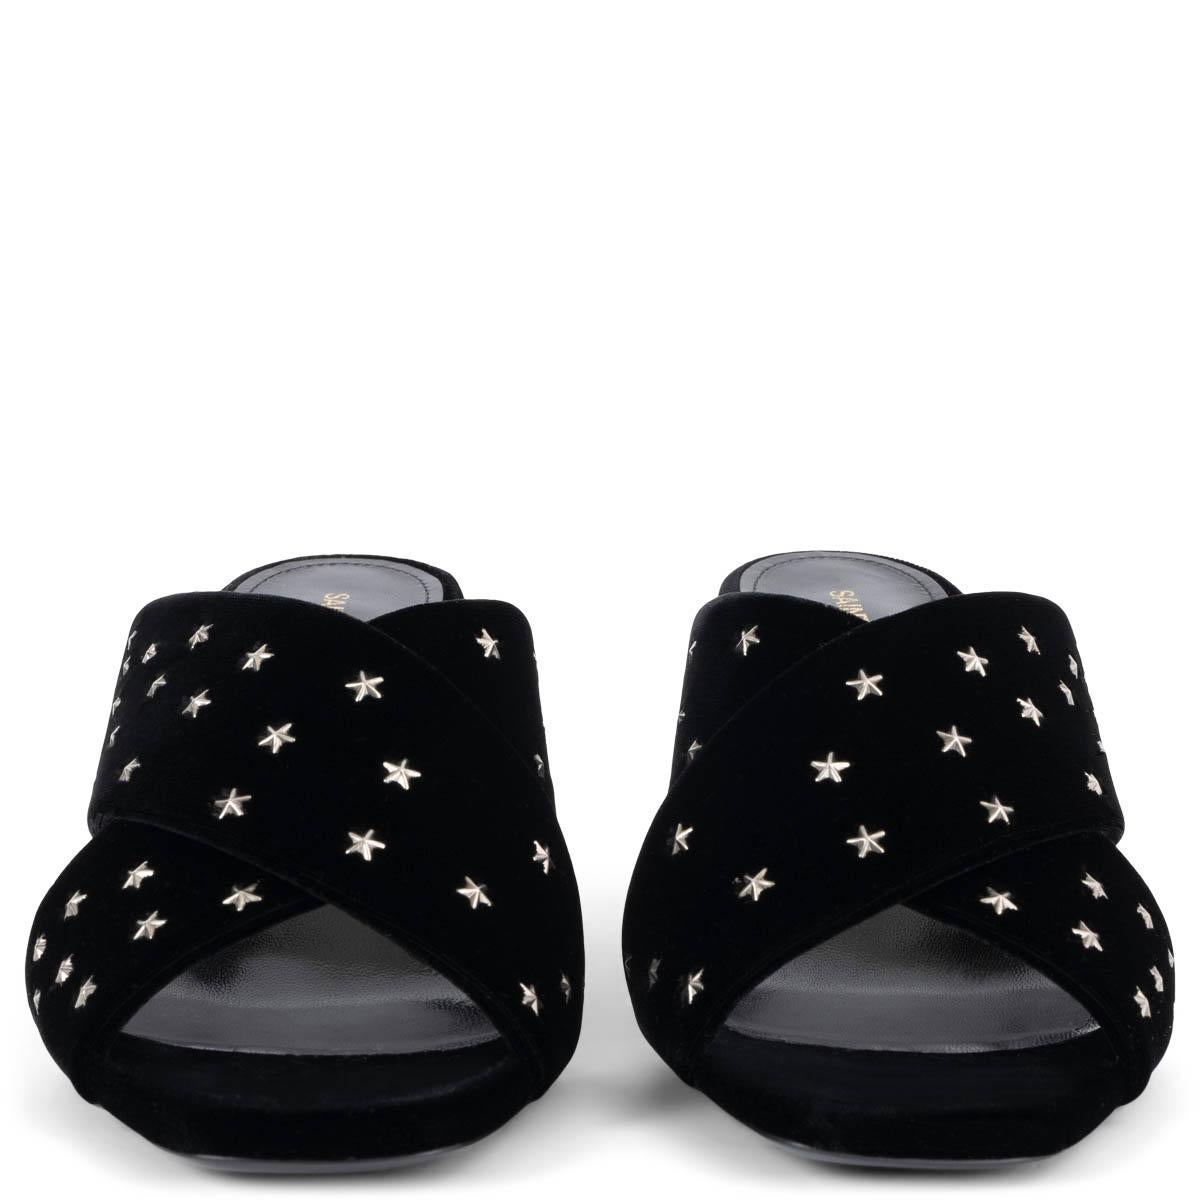 100% authentic Saint Laurent Lou Lou 70 mules in black velvet embellished with silver-tone metal stars. Have been worn once and are in virtually new condition. Come with dust bag. 

Measurements
Imprinted Size	37
Shoe Size	37
Inside Sole	23cm